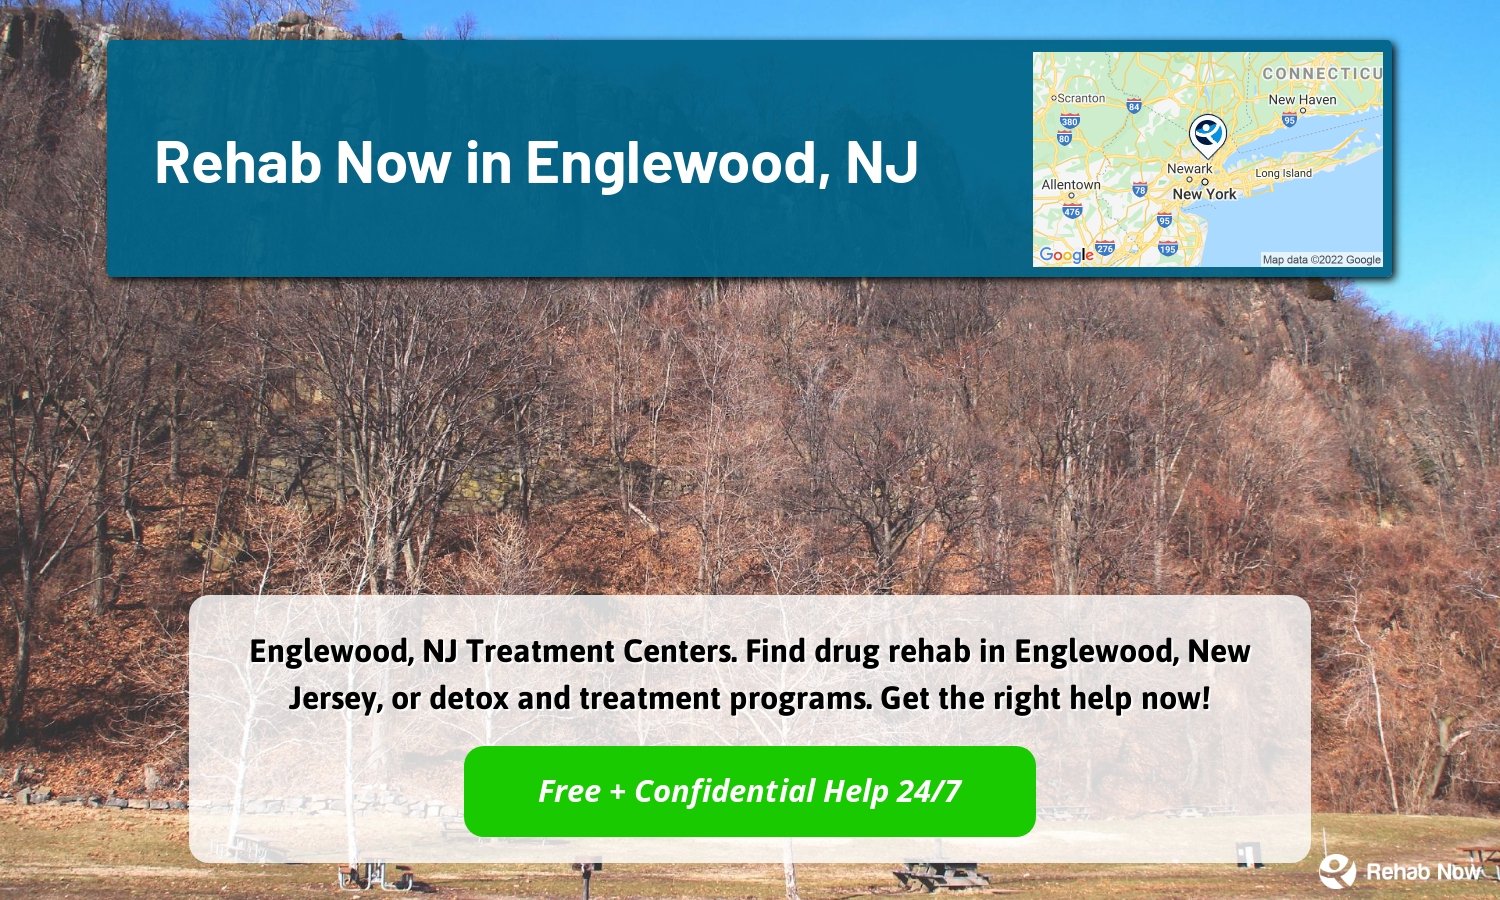 Englewood, NJ Treatment Centers. Find drug rehab in Englewood, New Jersey, or detox and treatment programs. Get the right help now!